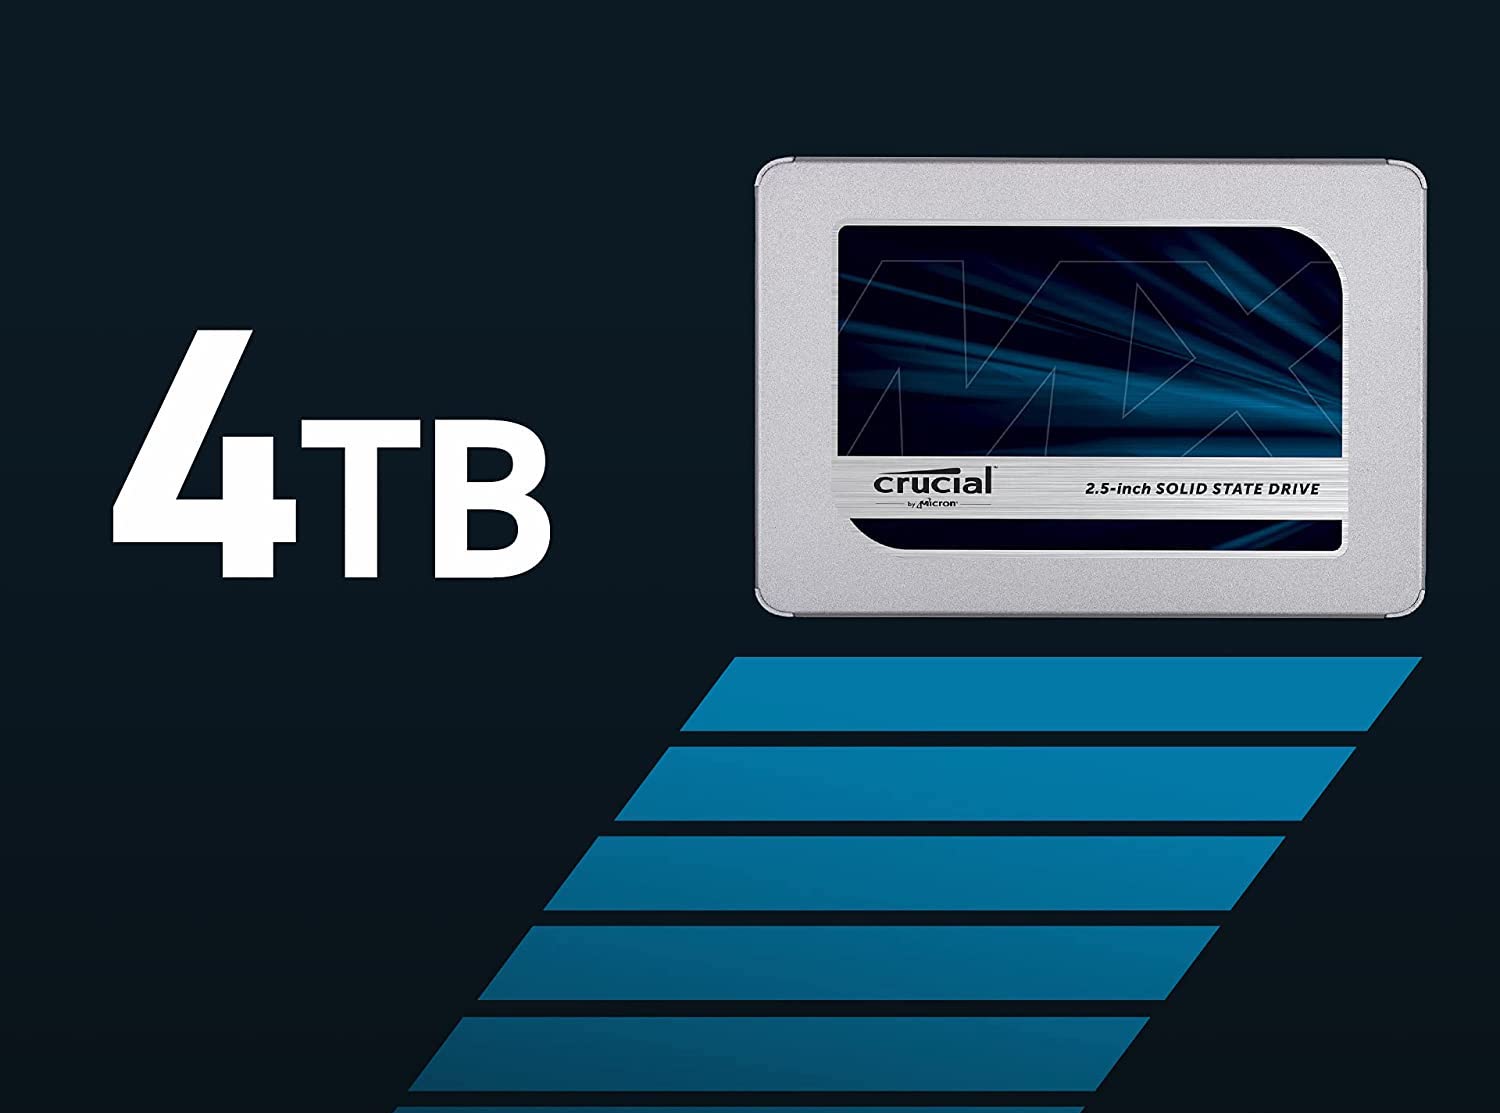 Crucial MX500 4TB SSD on sale for its lowest price ever